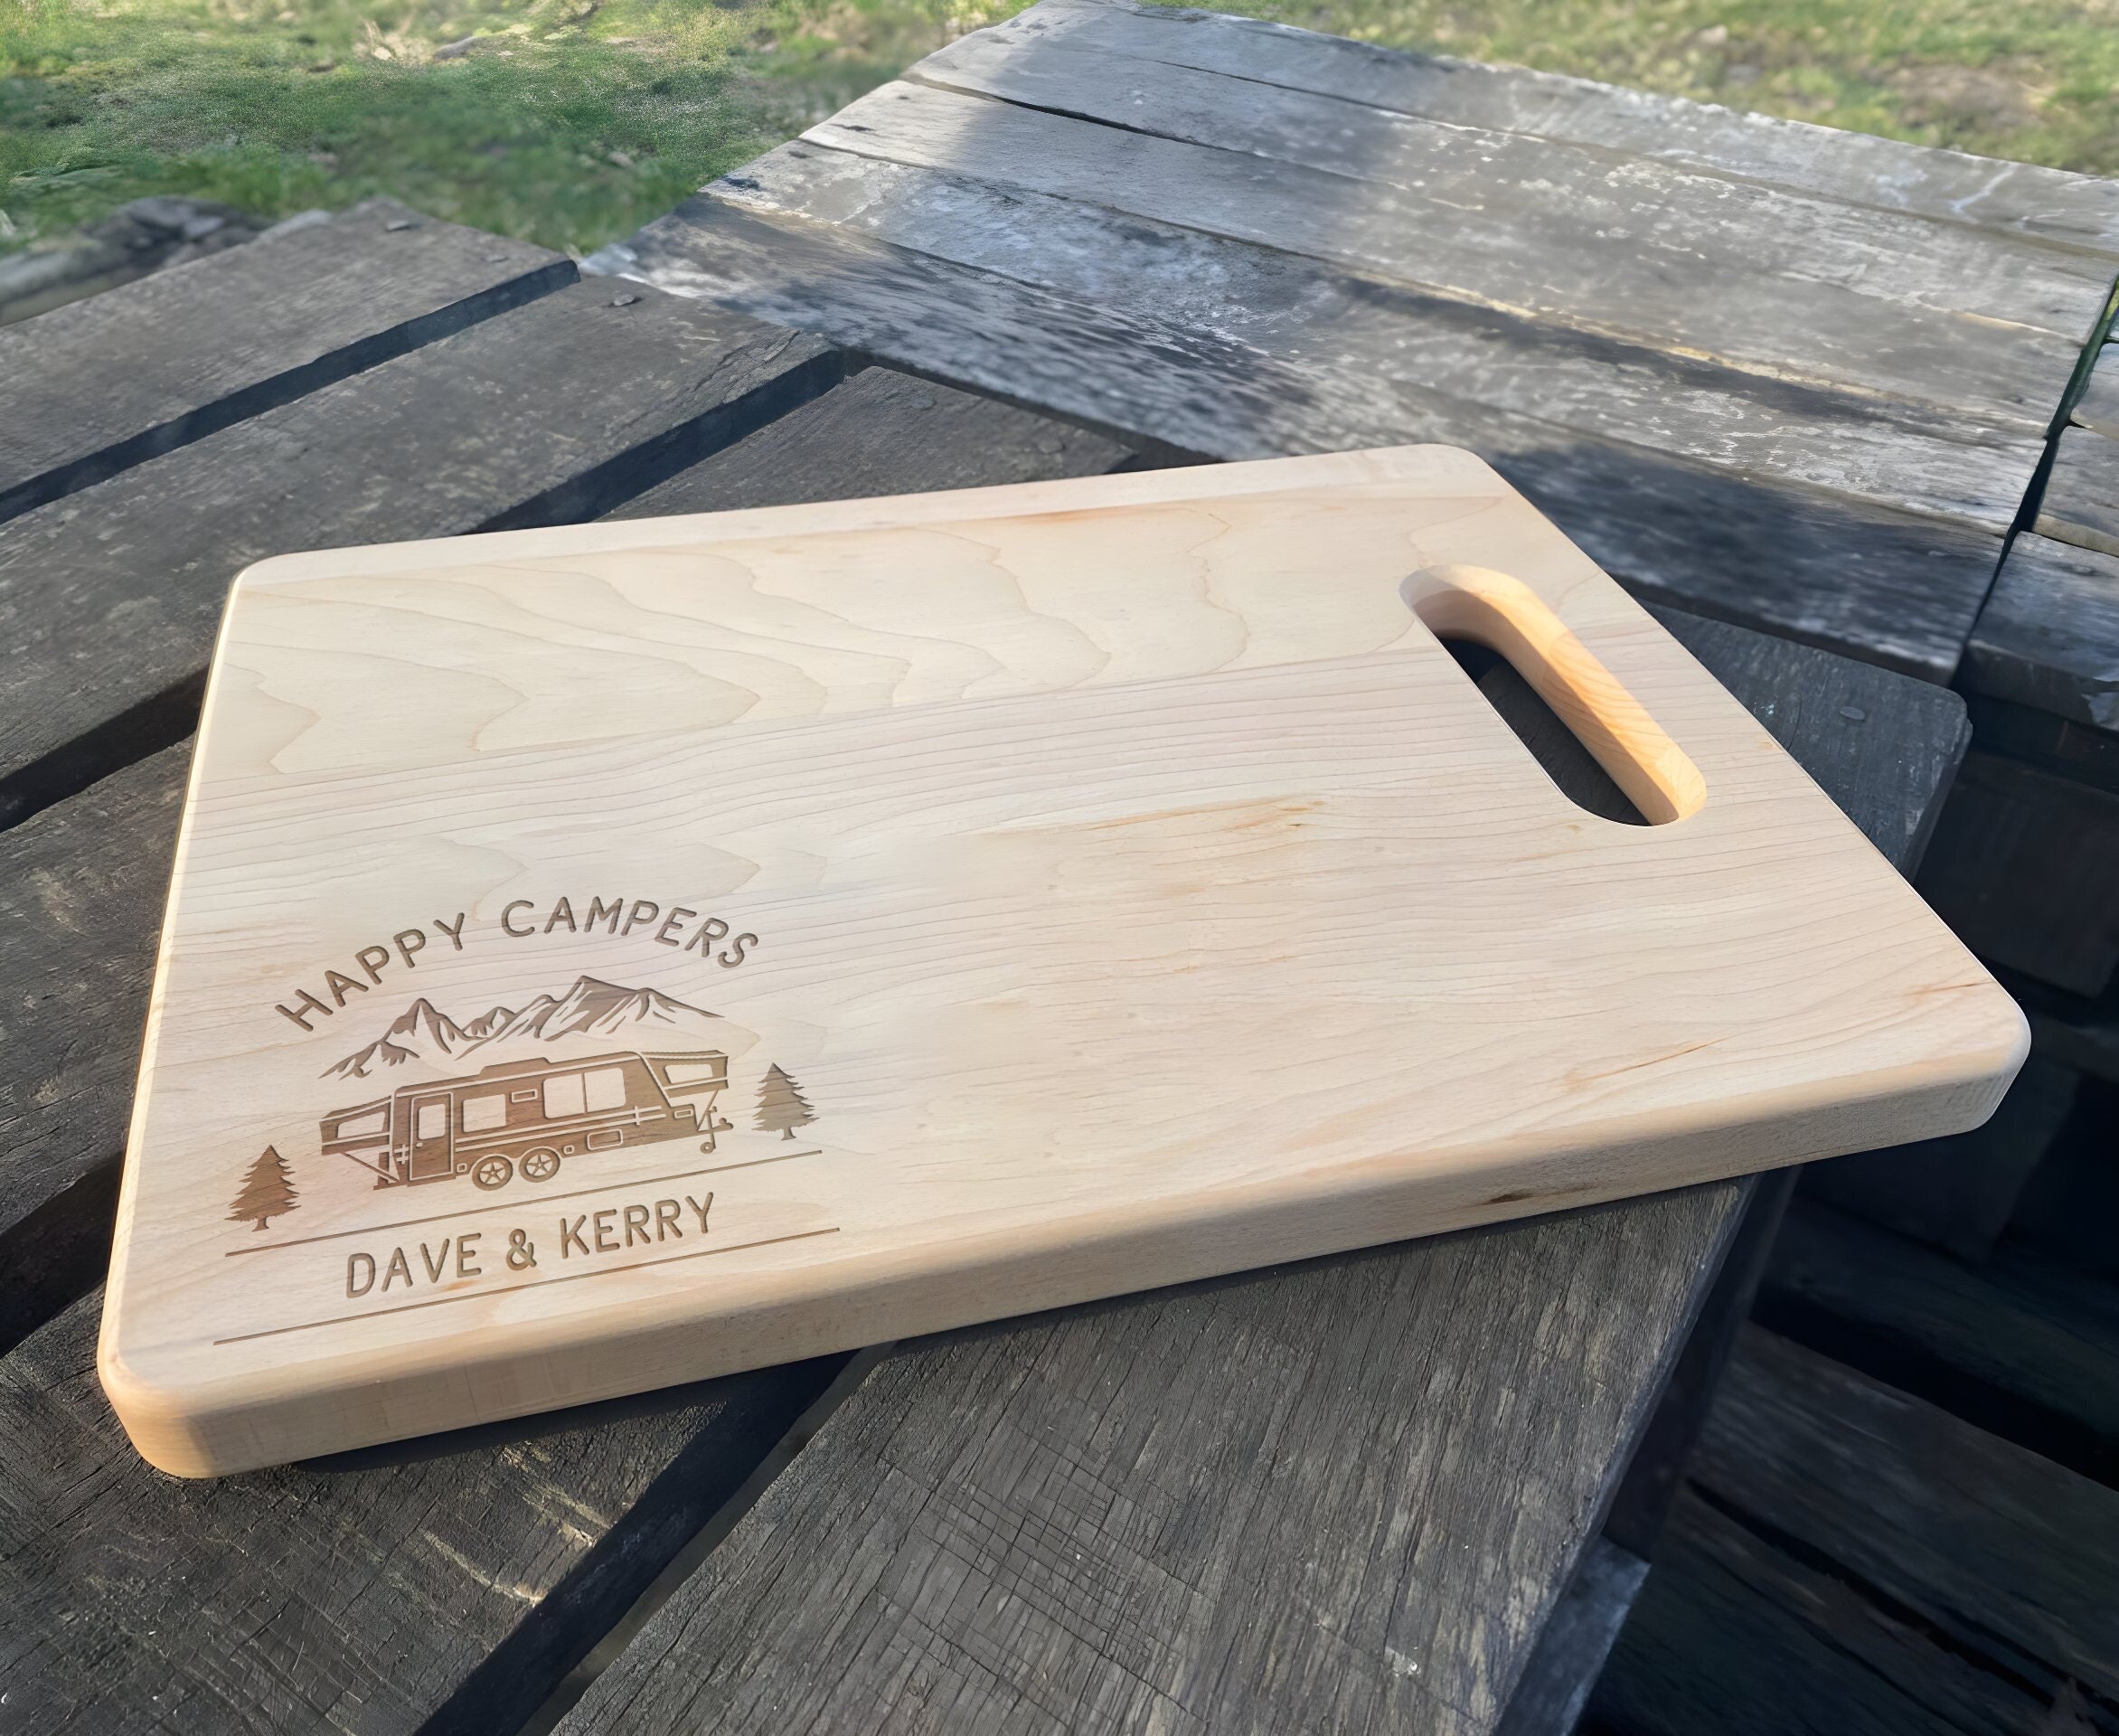 Camping, Camping Decor, Personalized Cutting Board, Teak Wood, Happy  Campers, Camping Sign, Camping Gifts, Camping Gear, gifts for him